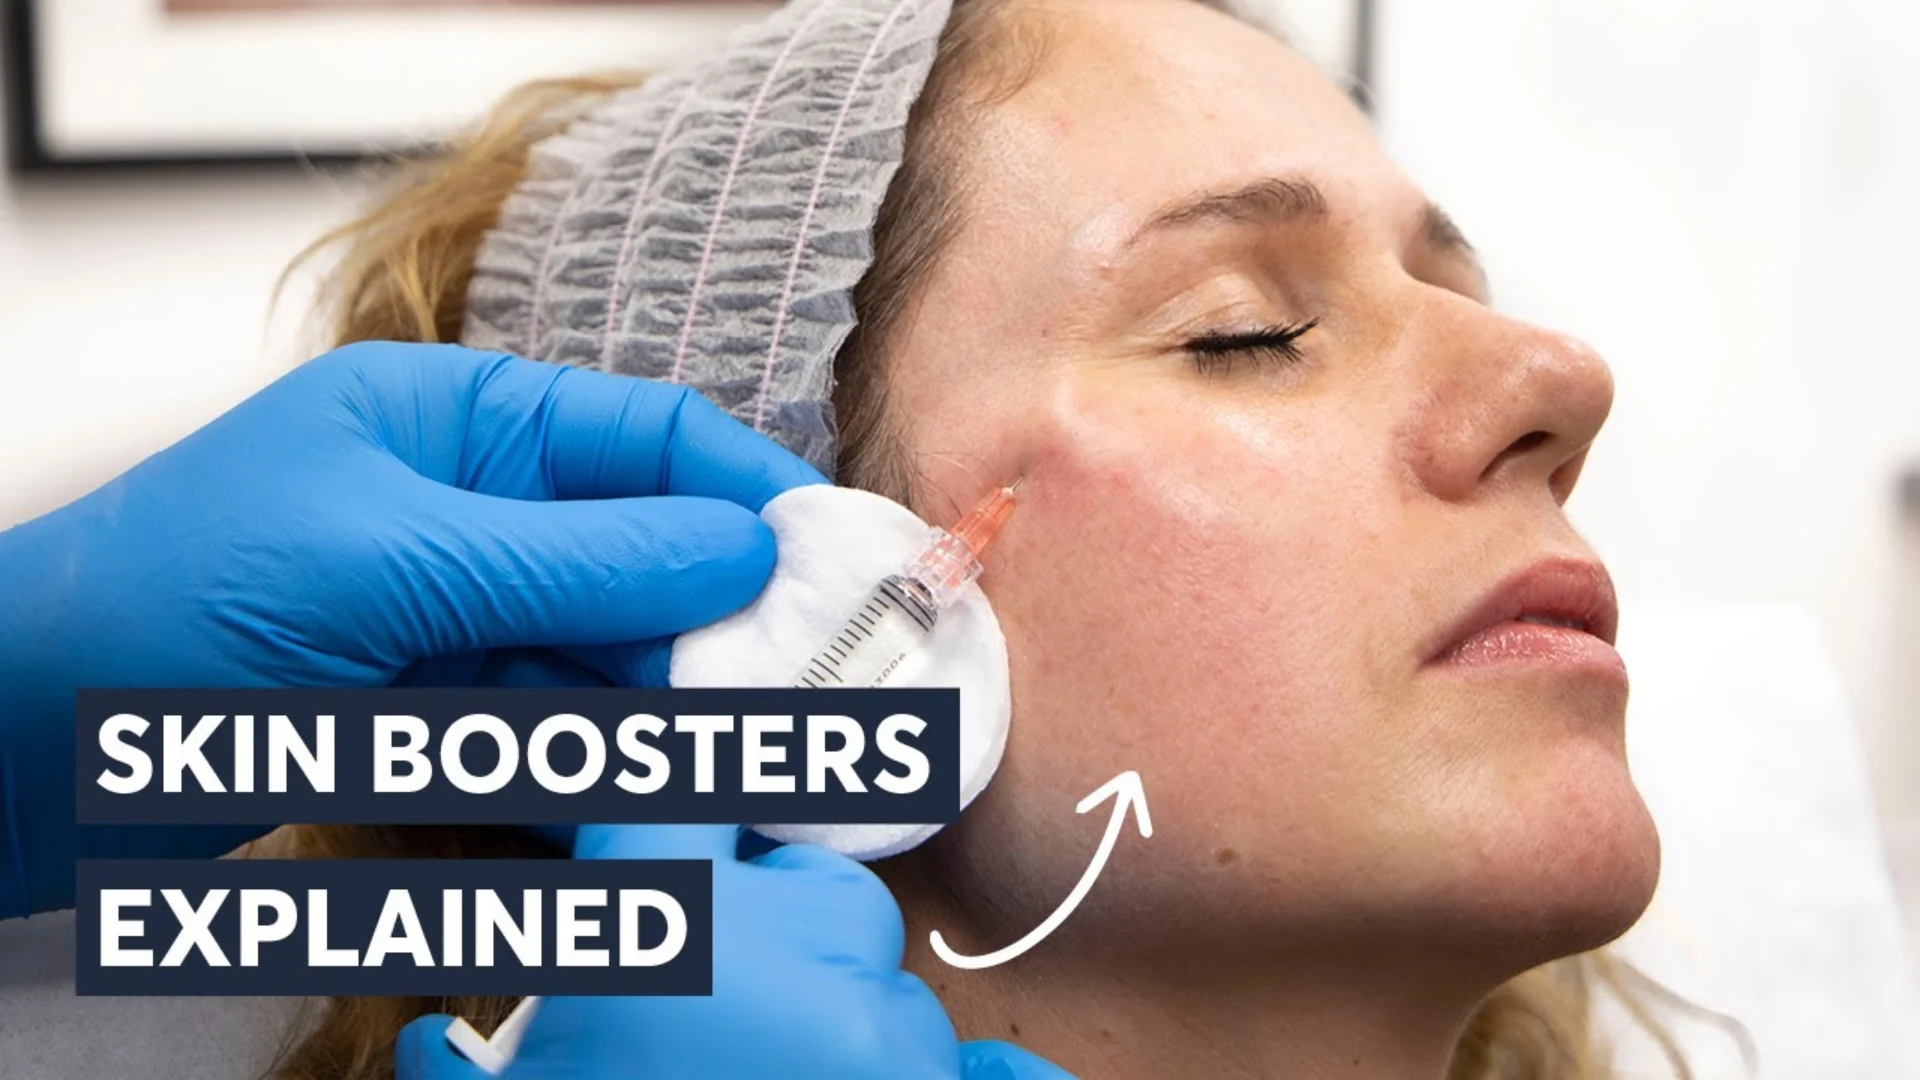 Skin Boosters Treatment! Discover the Procedure, Benefits, and how it boosts collagen, rejuvenating dull complexions.